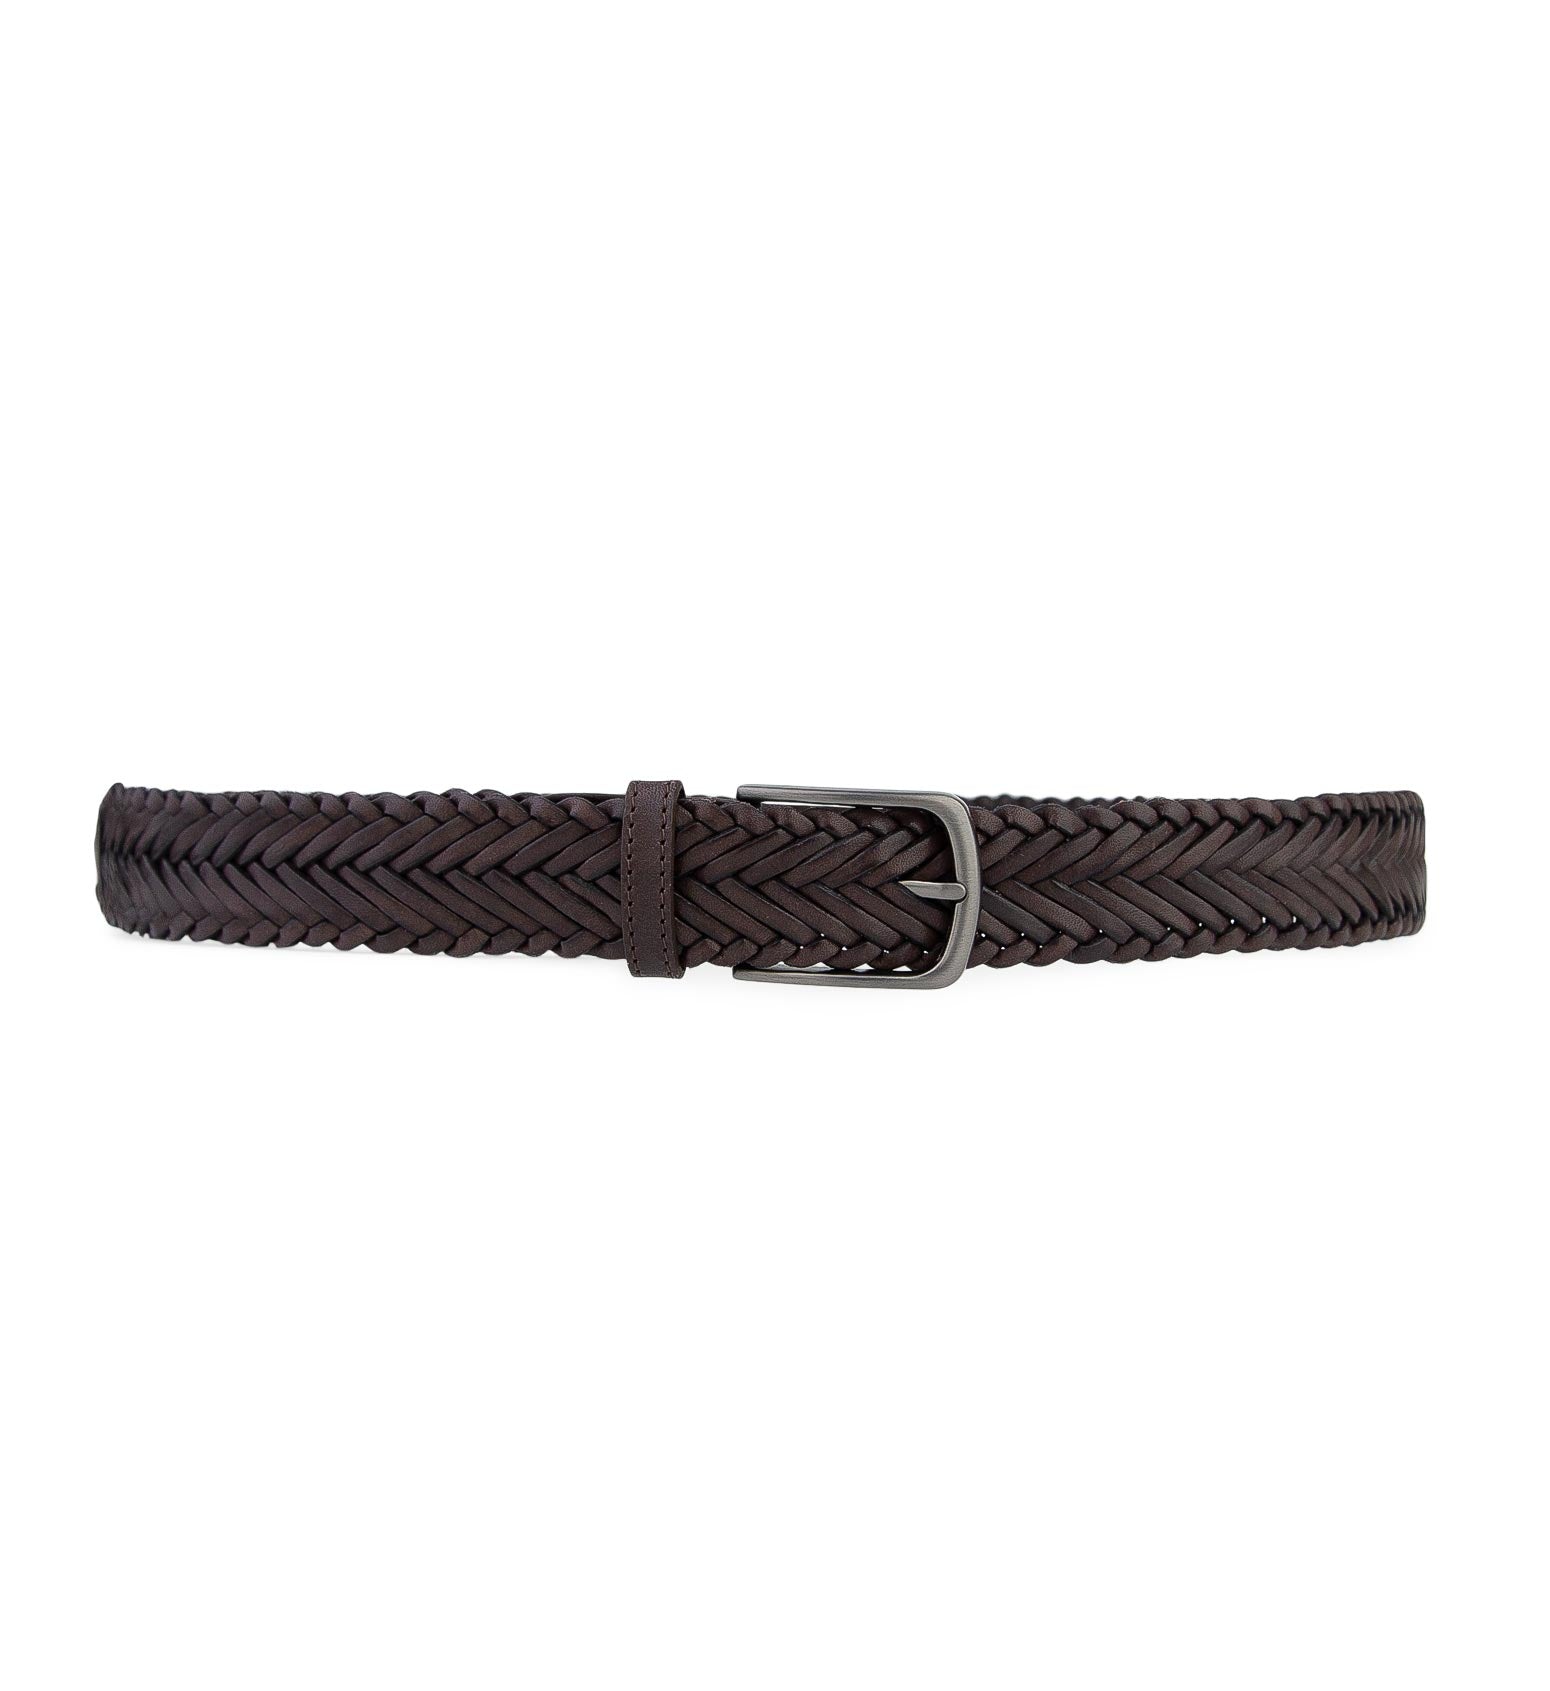 Woven Belt Chocolate Leather | Bared Footwear